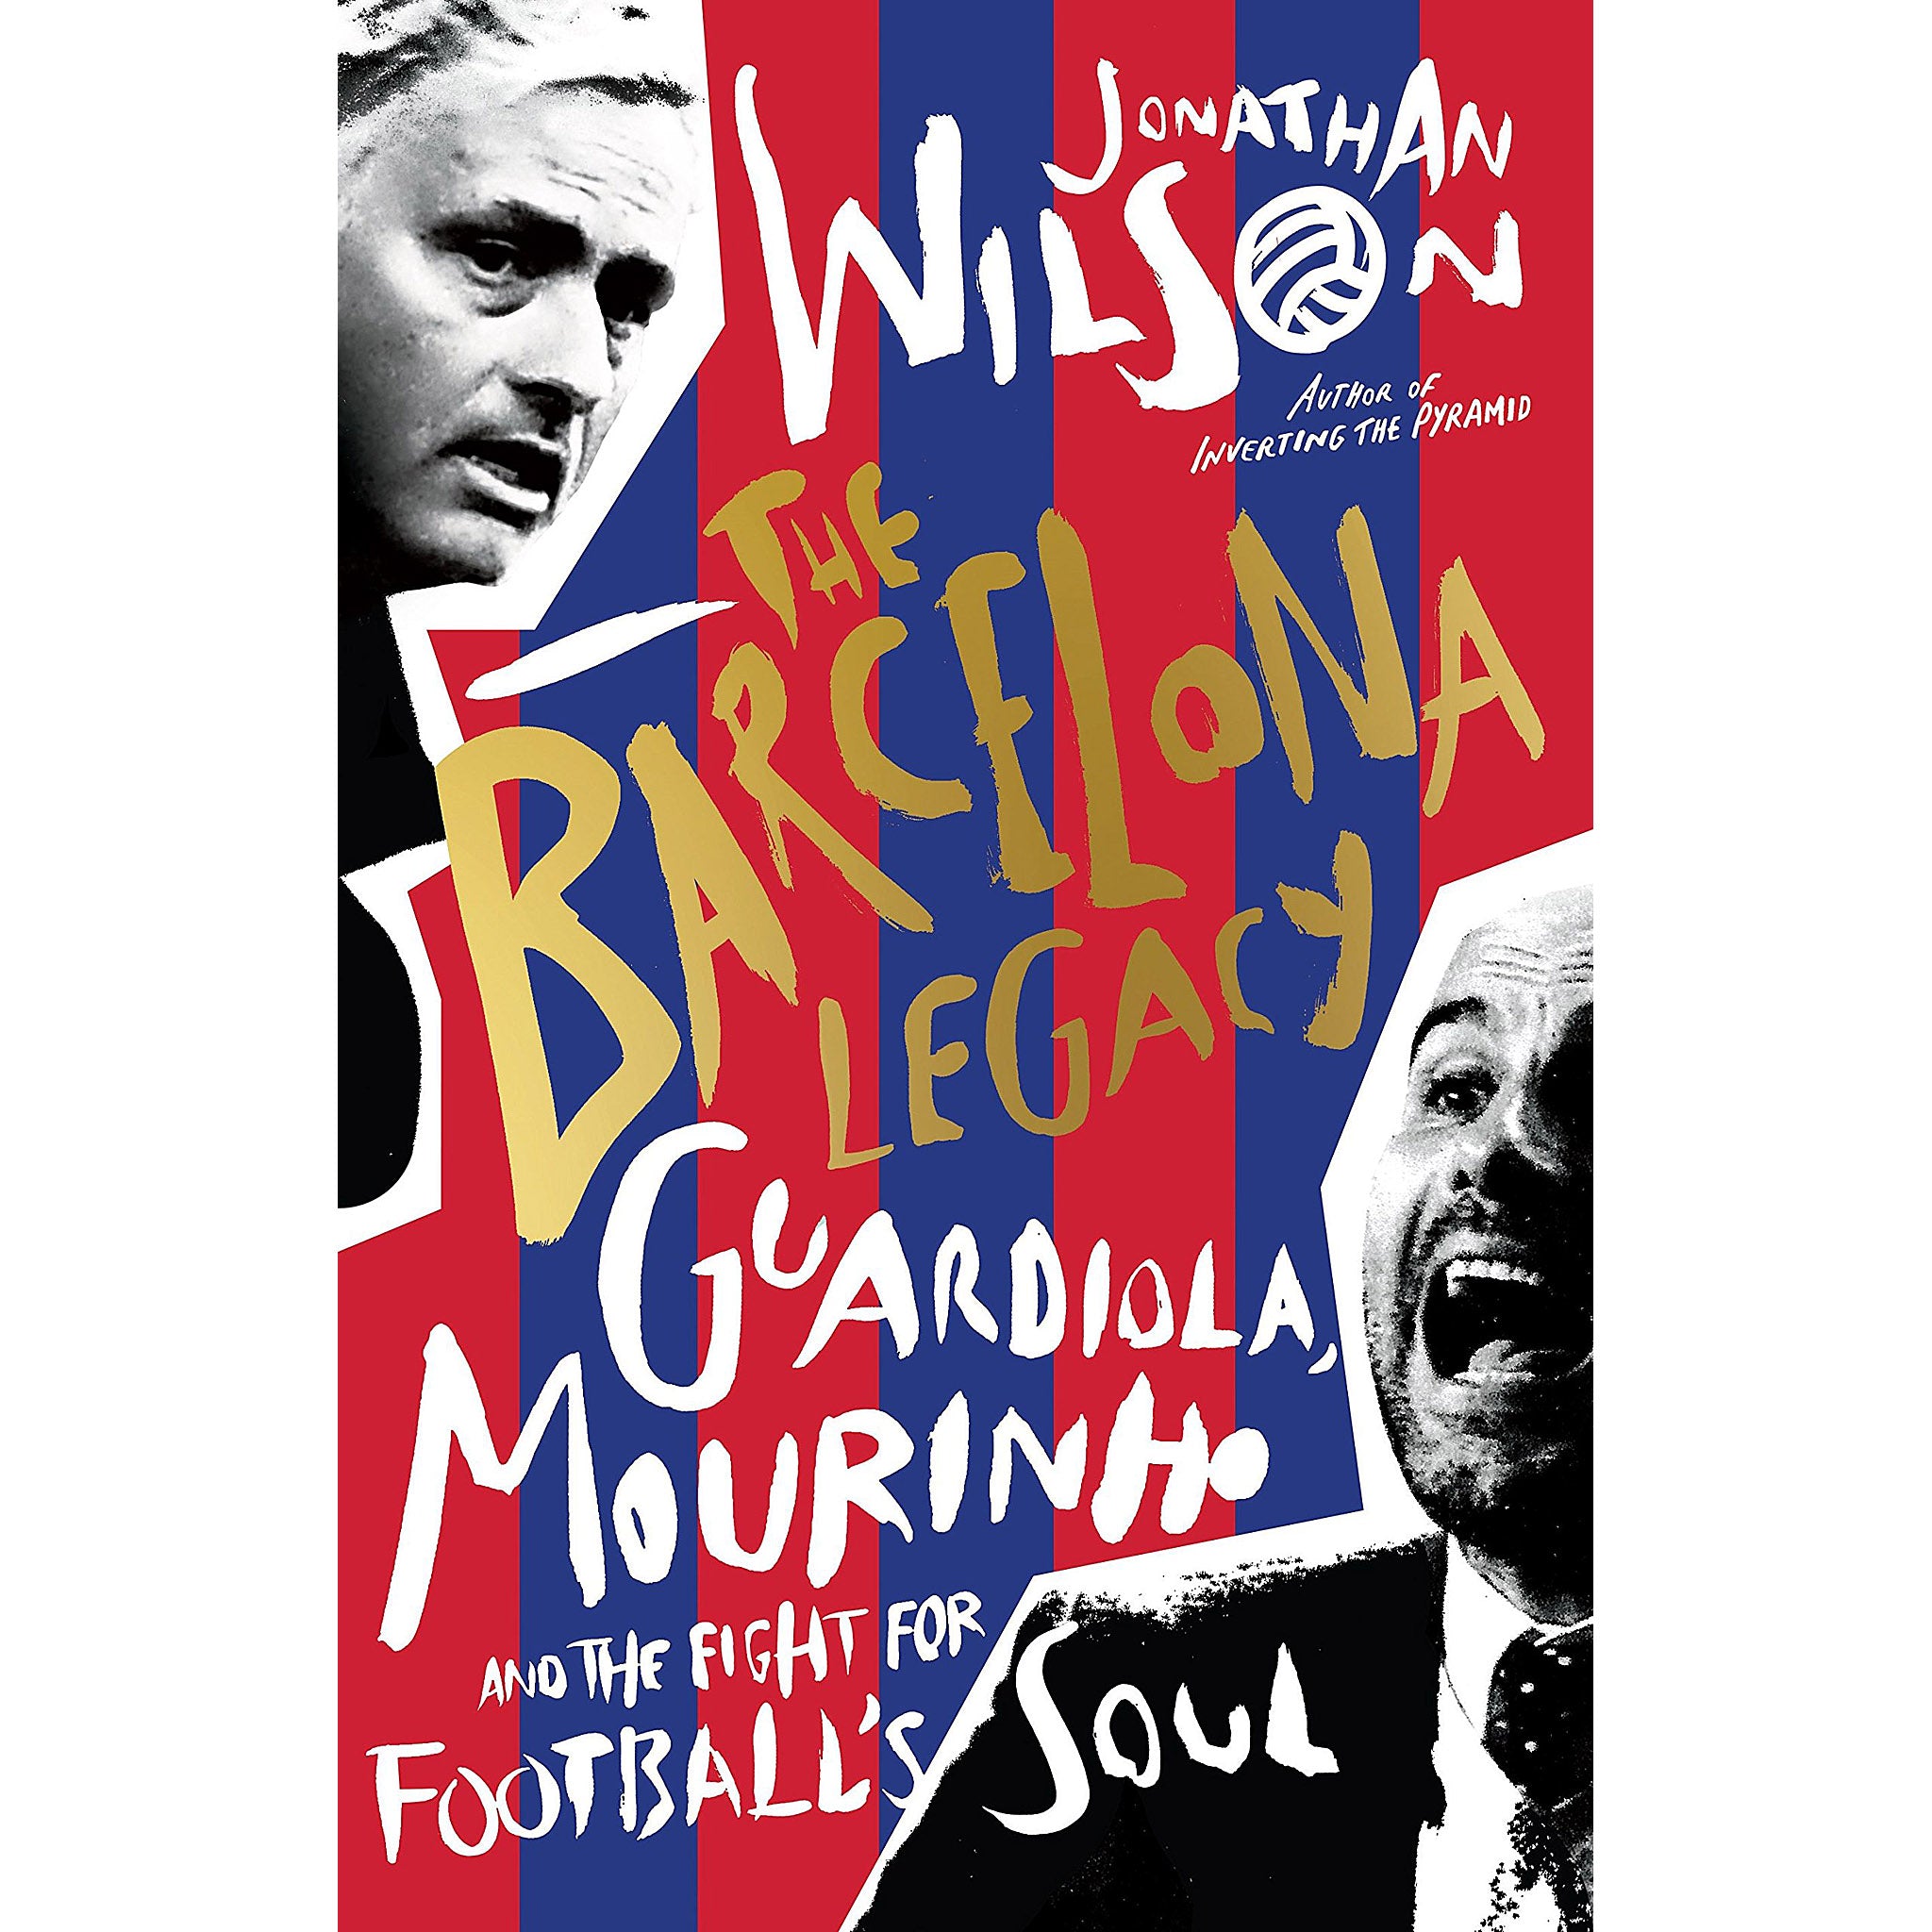 The Barcelona Legacy – Guardiola, Mourinho and the Fight for Football's Soul